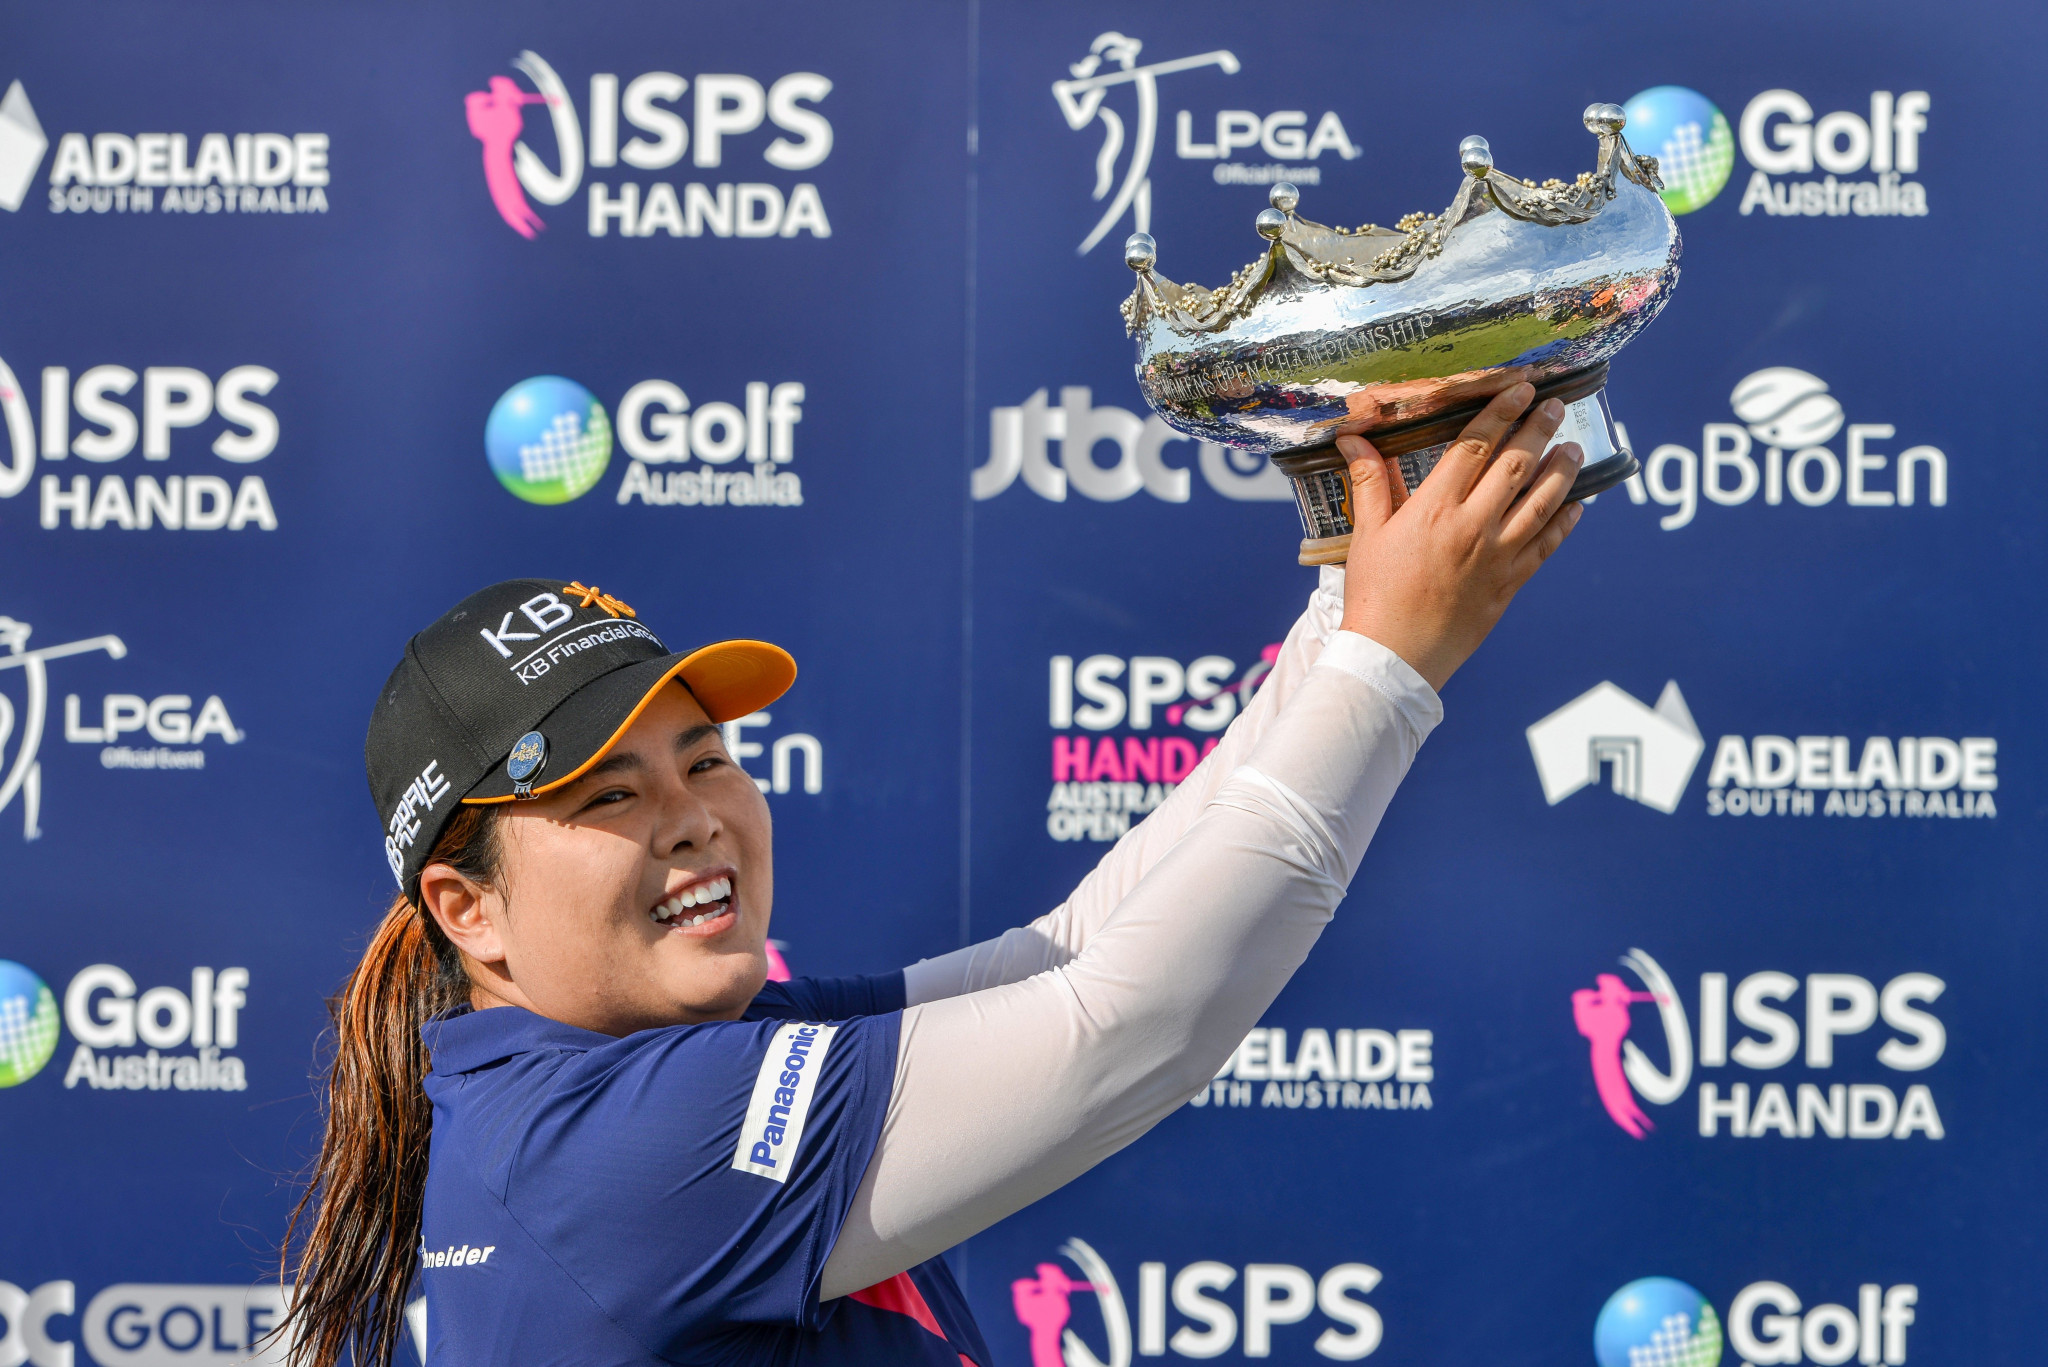 Park Inbee of South Korea - also the Olympic champion - will not be able to defend her Australian Open title in 2021 after the event was cancelled due to COVID-19 concerns ©Getty Images